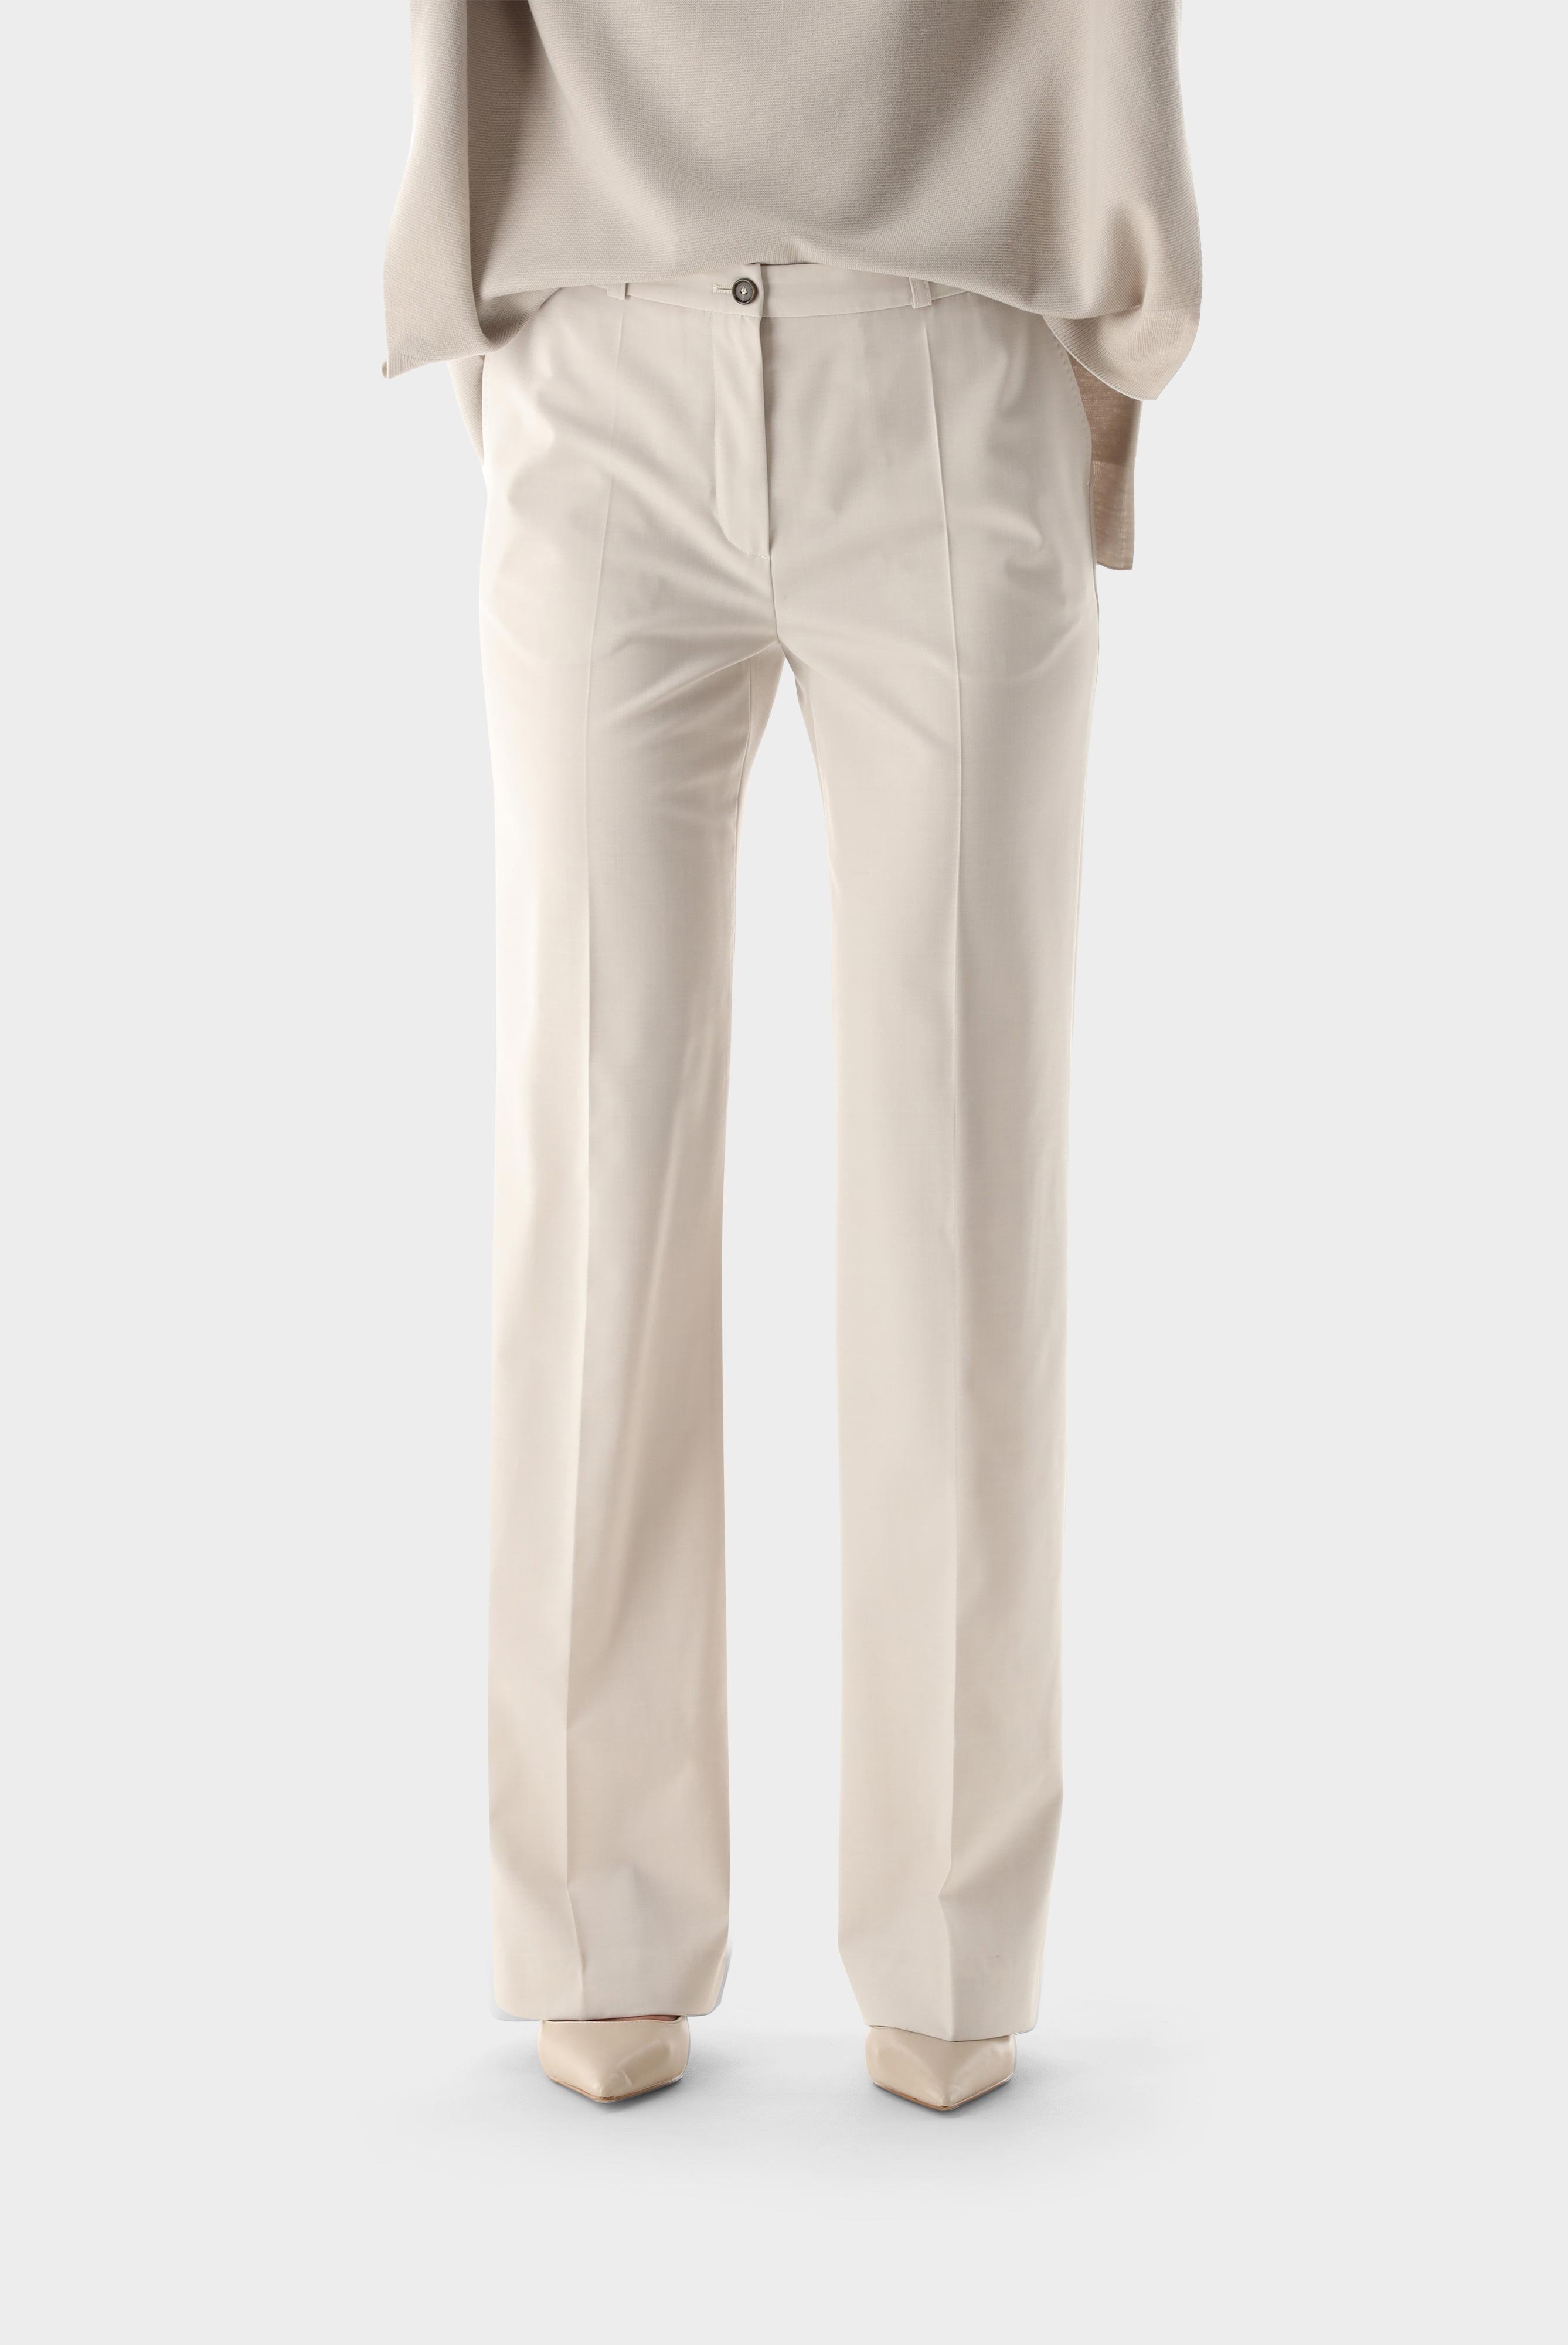 Jeans & Trousers+Pants with Straight-leg and Stretch+05.6354..H00162.010.38